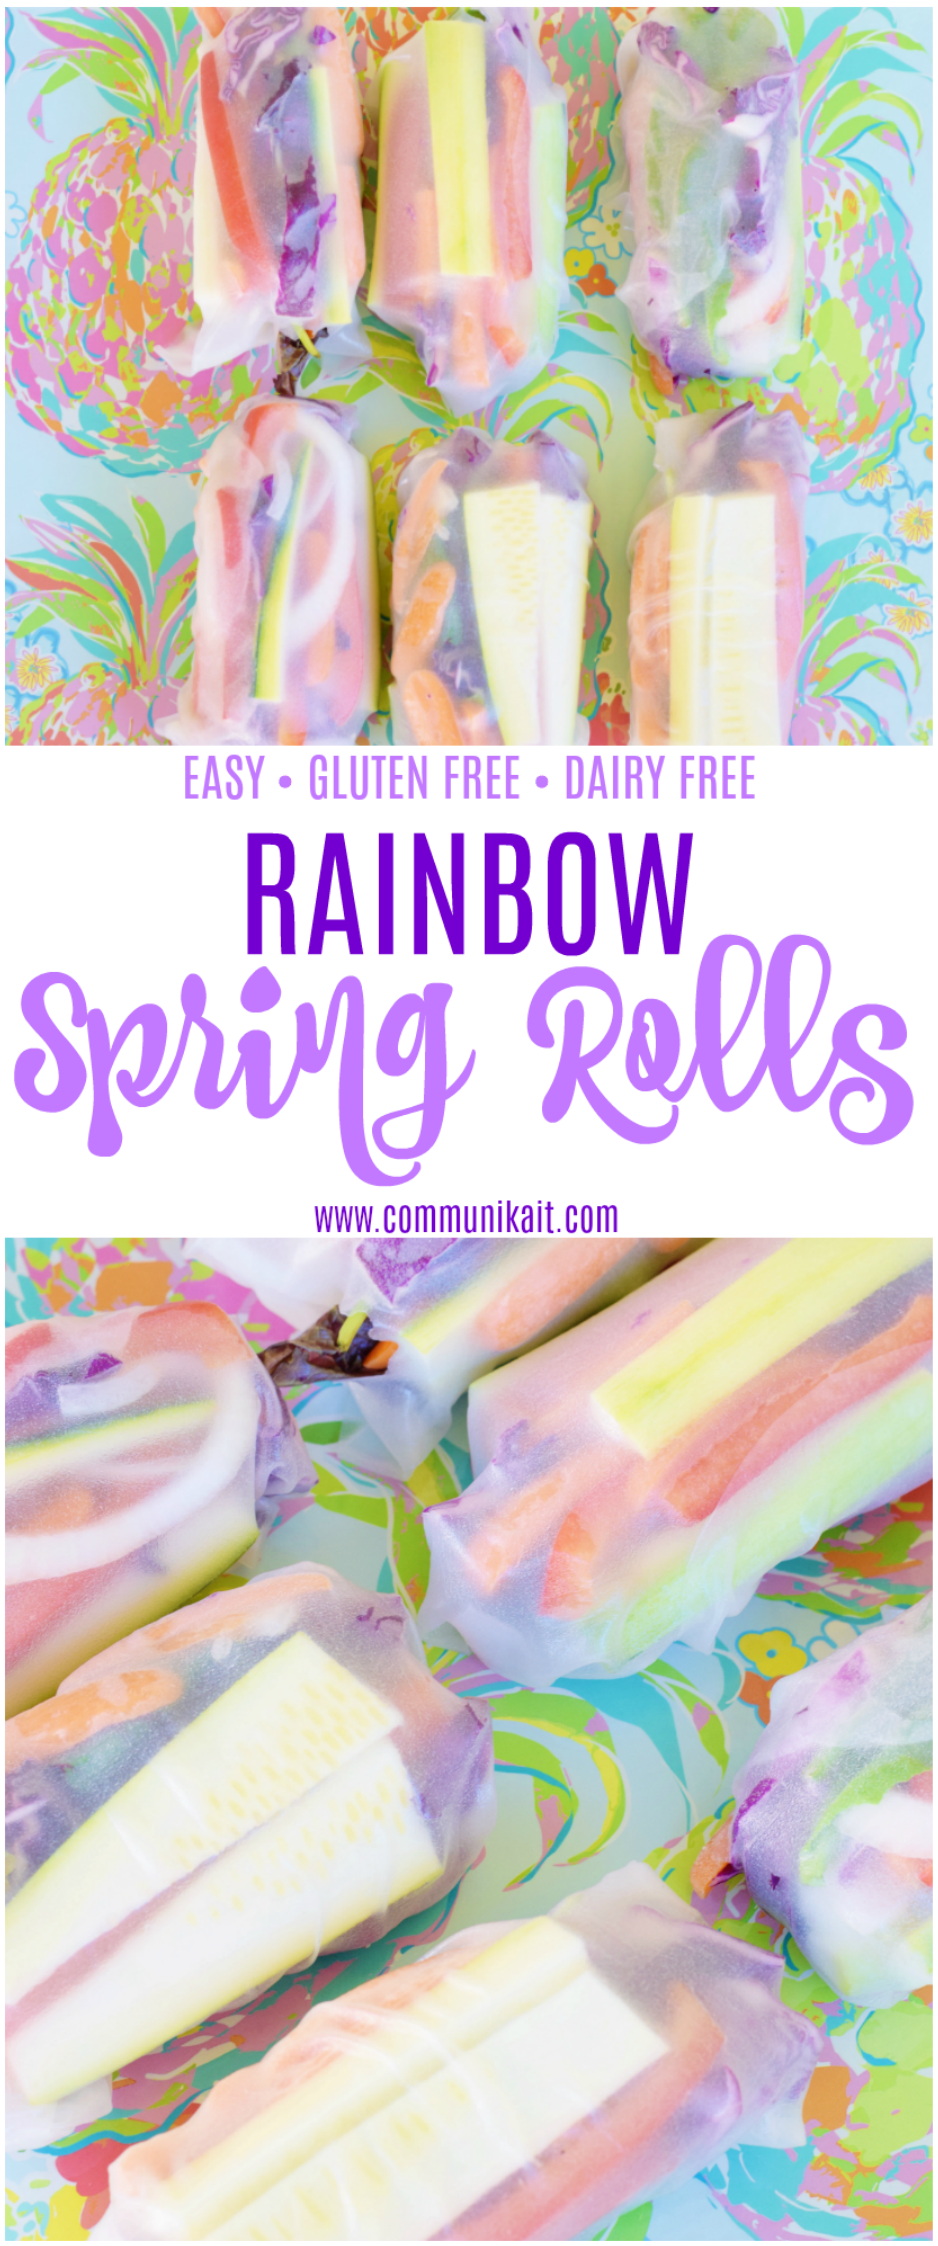 Colorful Vegetable Spring Rolls Recipe - Dairy and Gluten Free - Make At Home - Zucchini, Carrots, Onions, Cucumber, Peppers, Basil, Mint + Mixed Greens - Rainbow Spring Rolls - Communikait